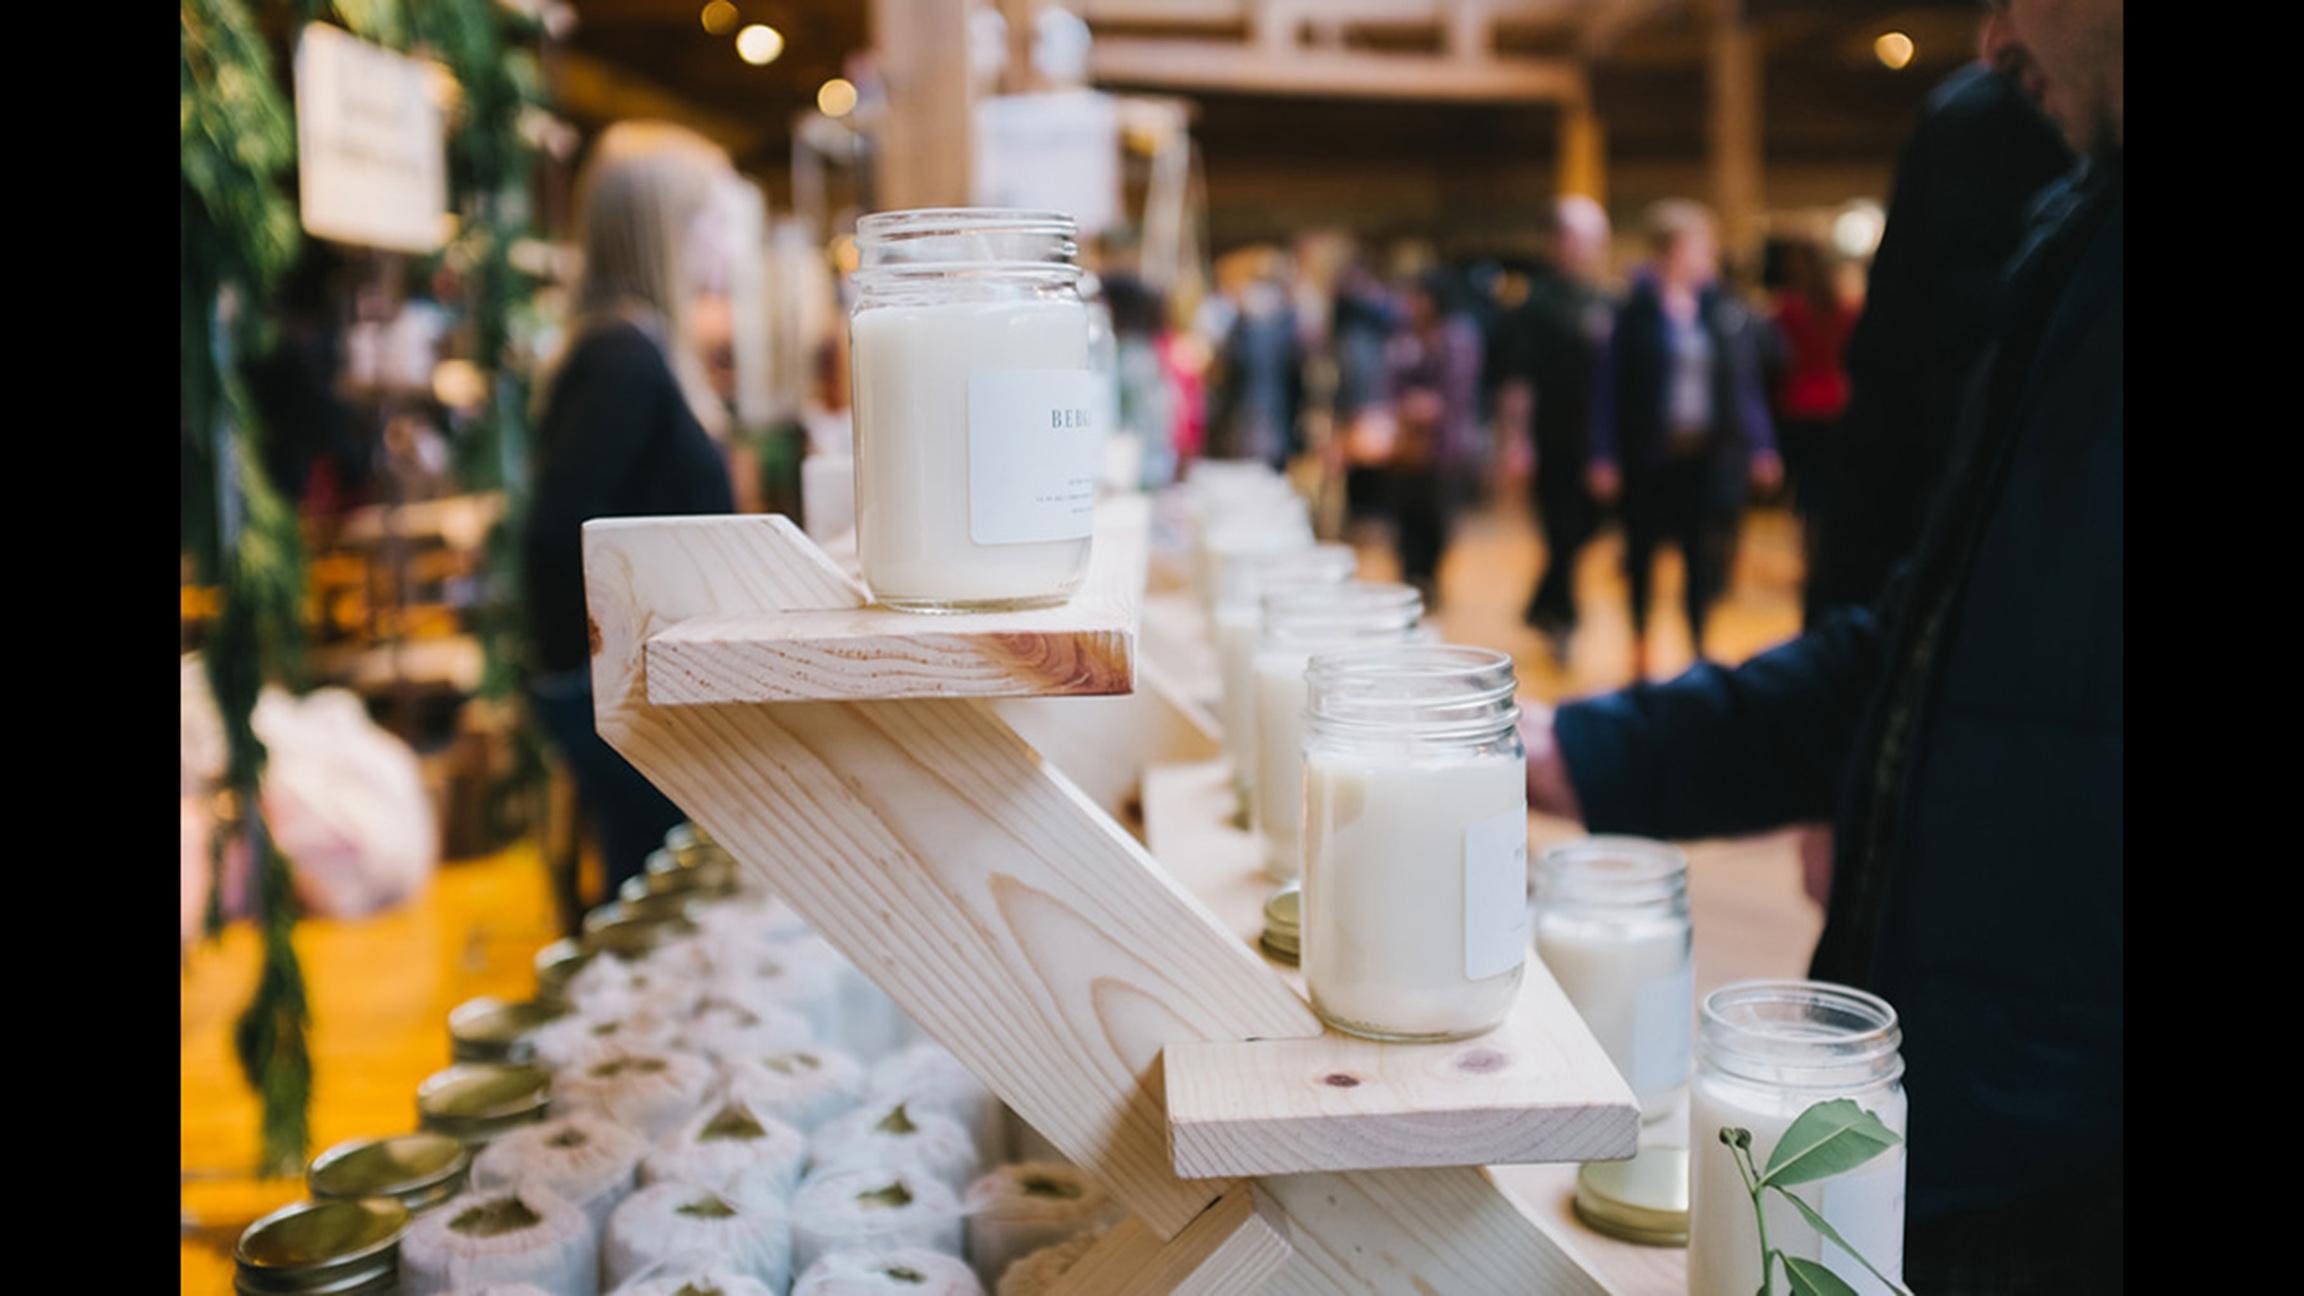 Obsess over all the lovely things you want to buy at holiday markets this weekend. (Courtesy Renegade Craft Fair)